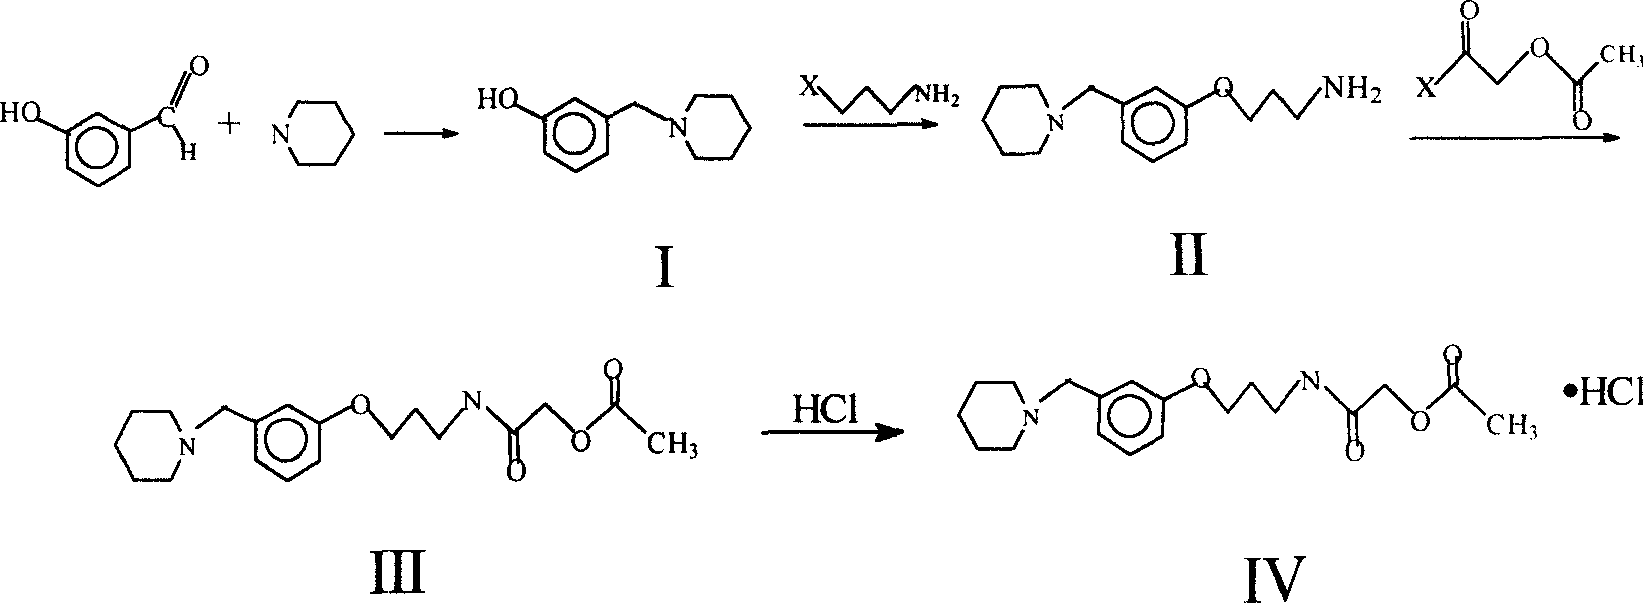 Synthesis process of roxatidine acetate hydrochloride